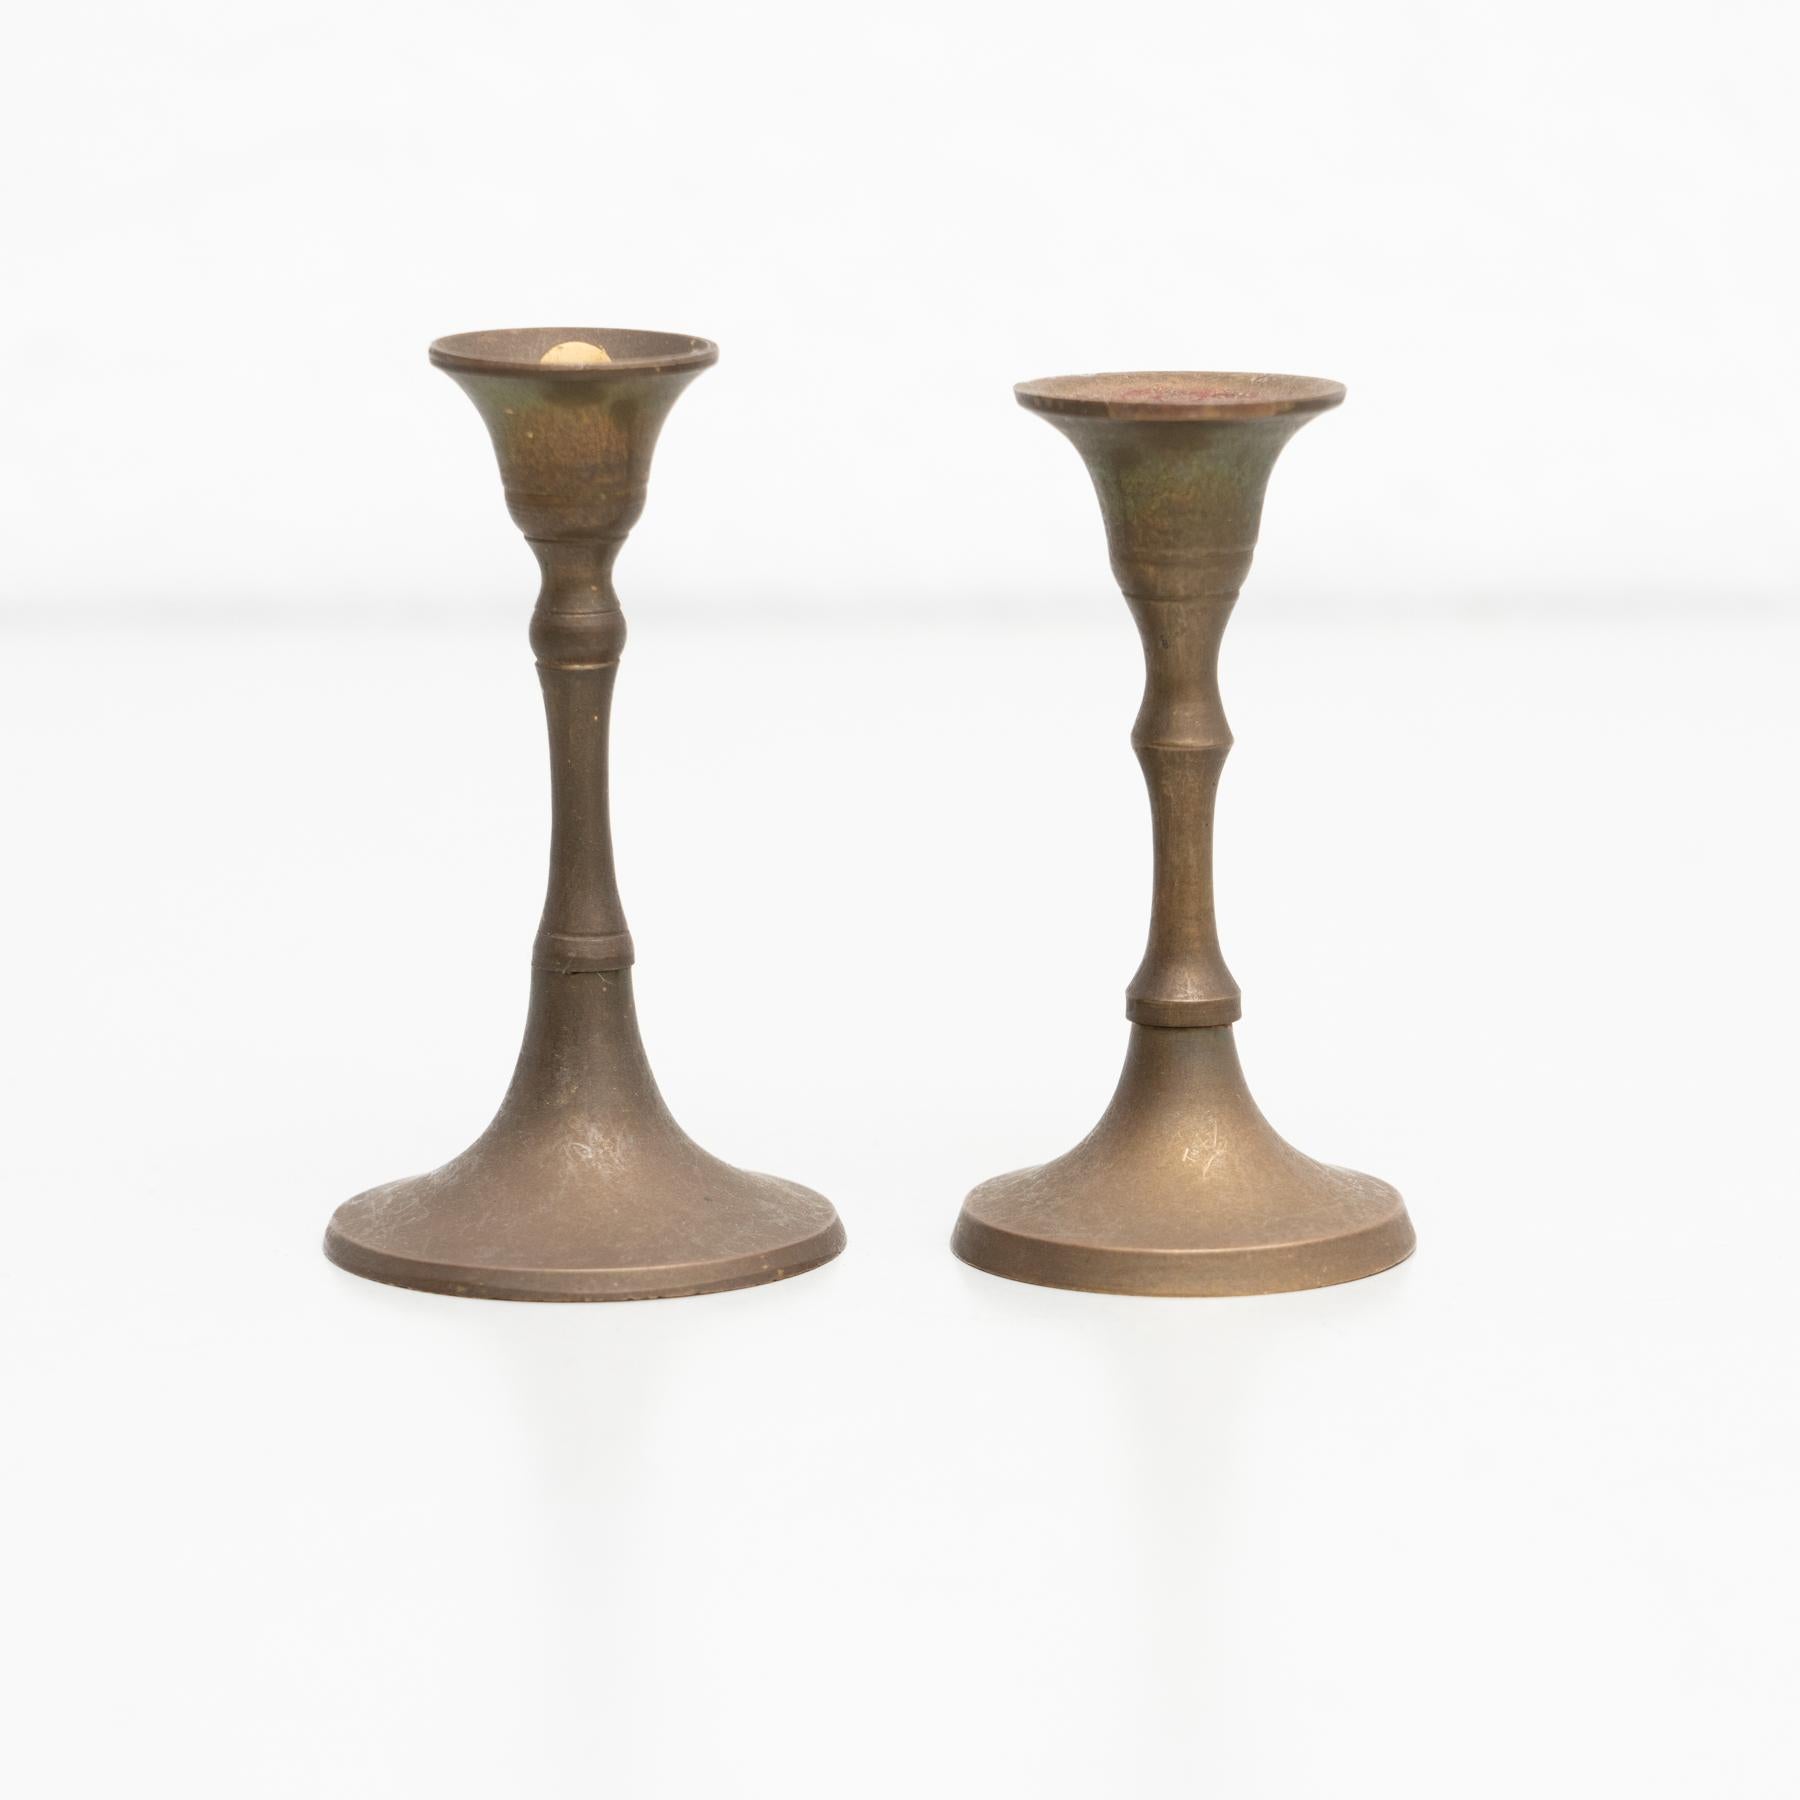 Set of two rustic brass candle holders, circa 1950
By unknown manufacturer, made in Spain

In original condition, with minor wear consistent with age and use, preserving a beautiful patina.
  
Material:
Brass.

